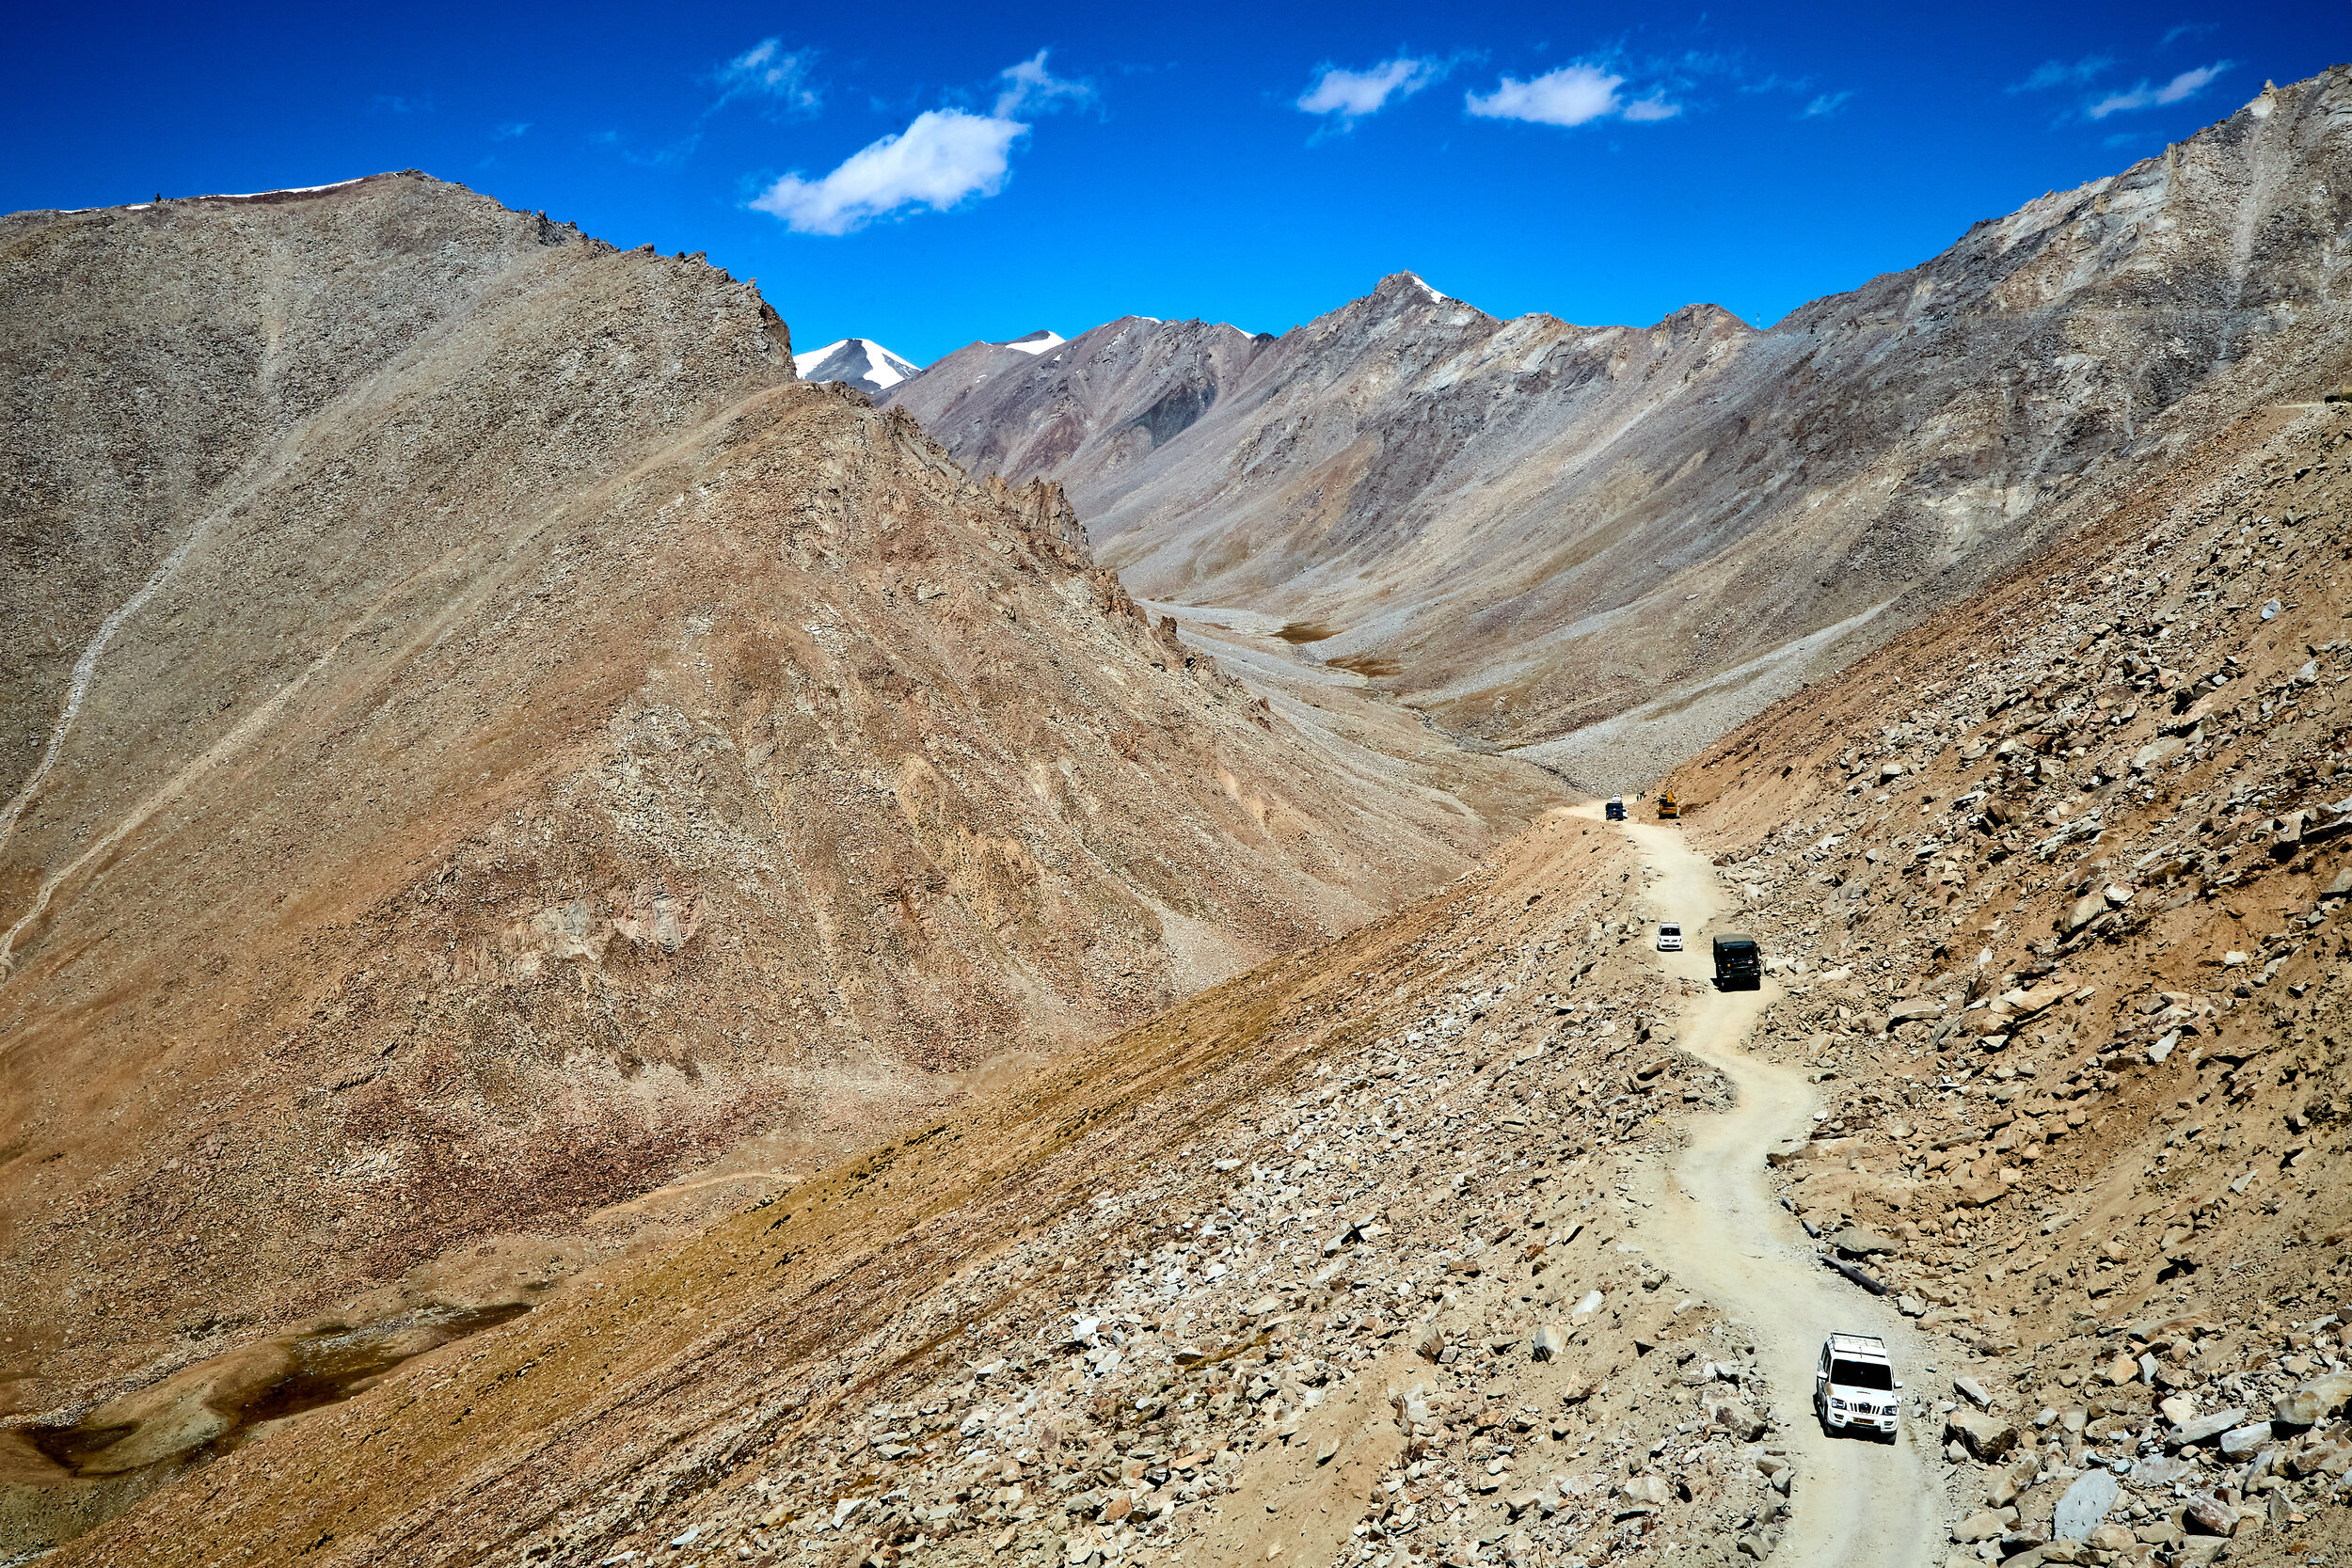  Narrow roads connect the various localities in the Ladakh region. This particular road leads to Nubra valley from Leh and will pass through the world’s highest motorable road at Khardung la.  